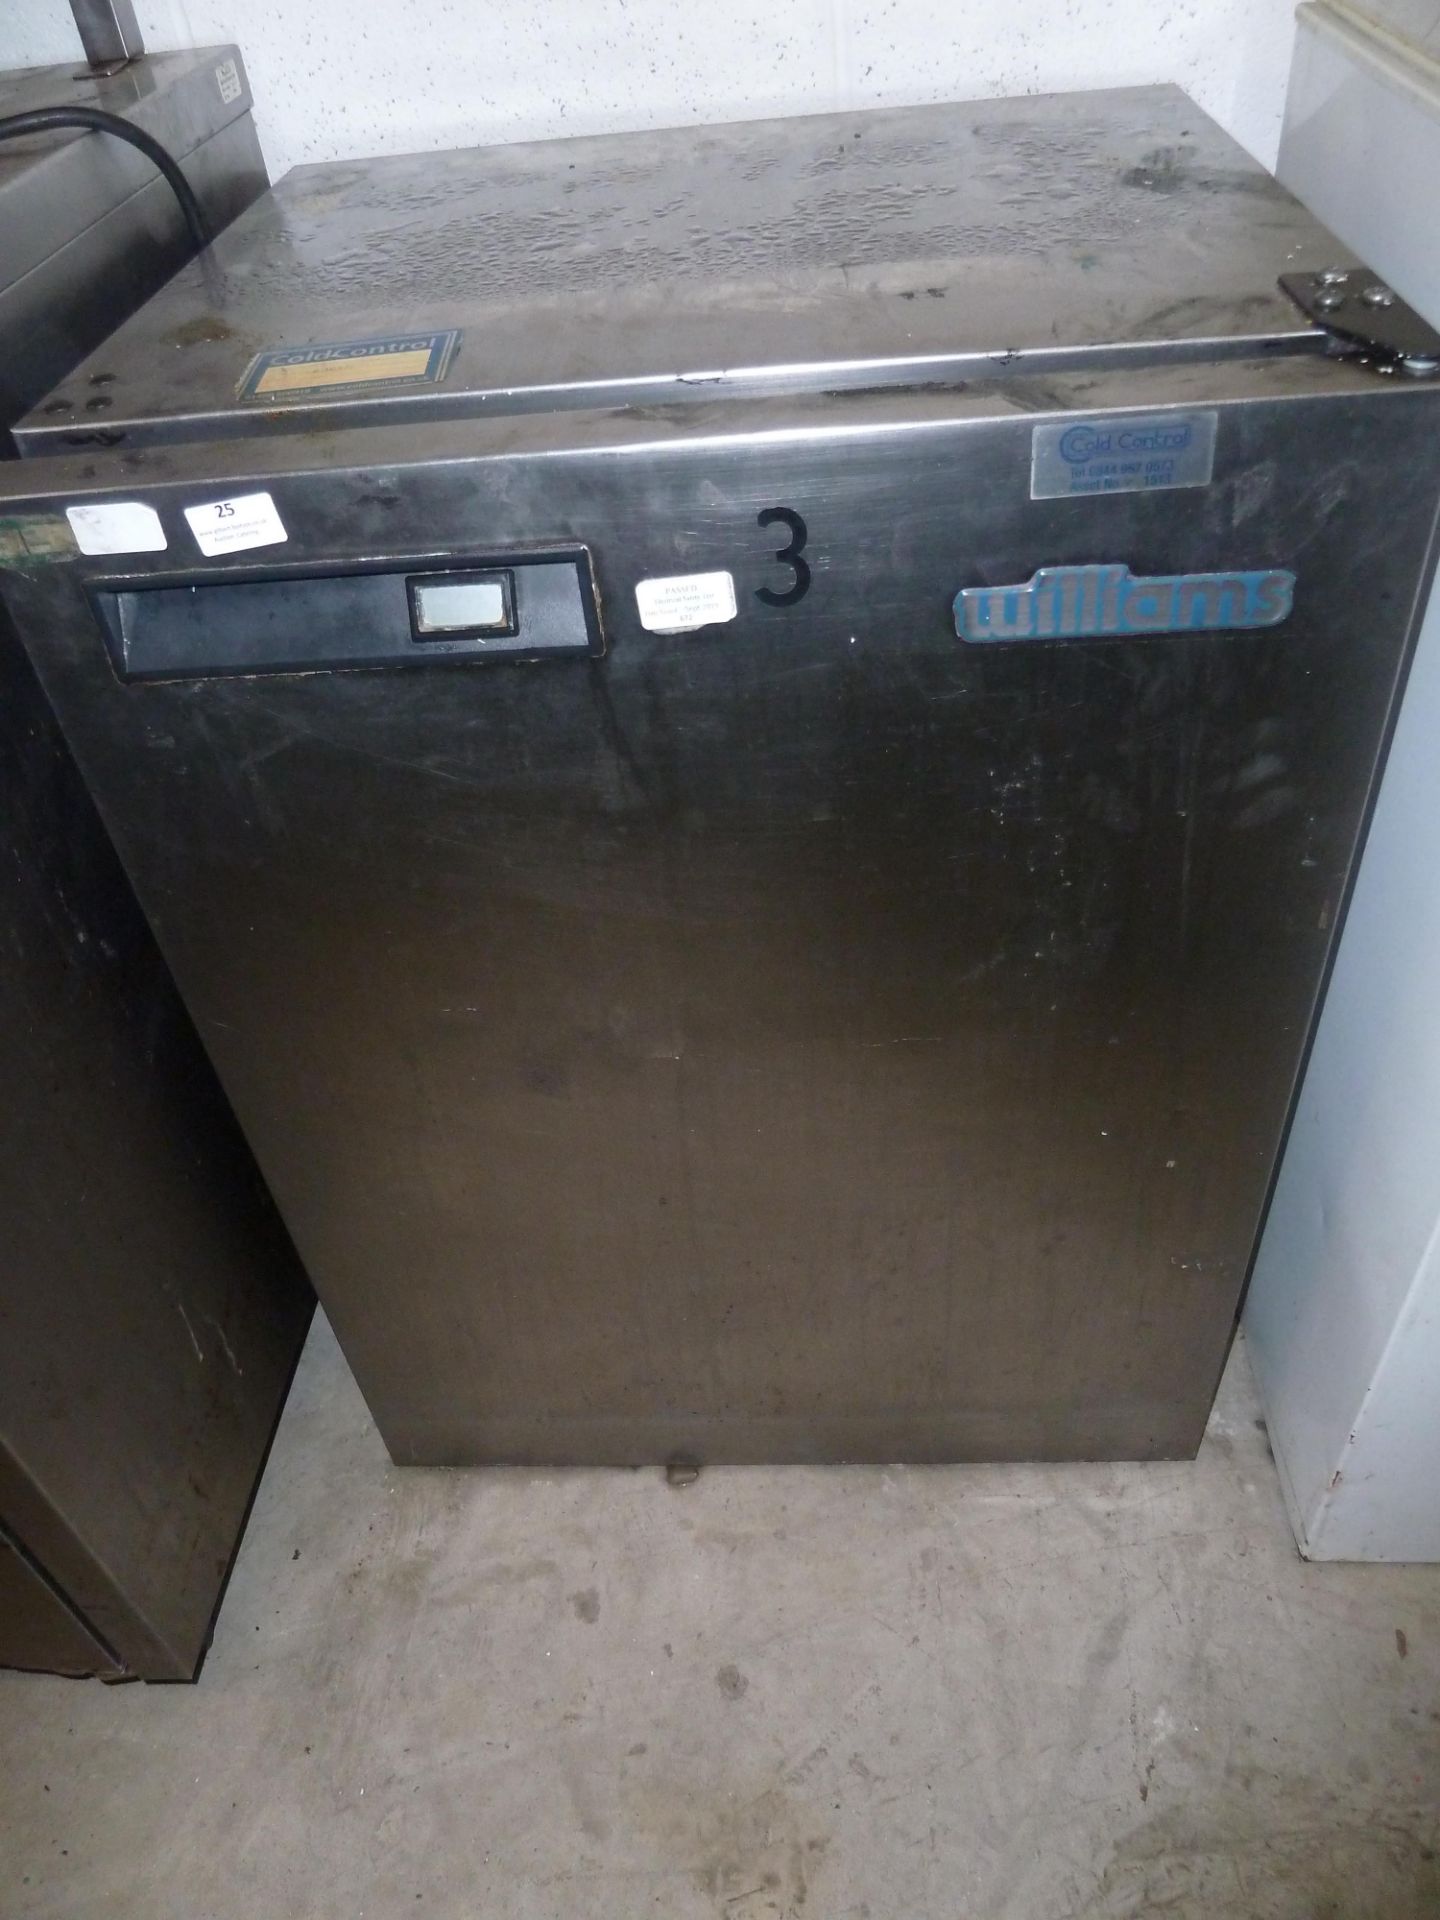 * Williams under counter freezer in working condition. 600w x 550d x 800h